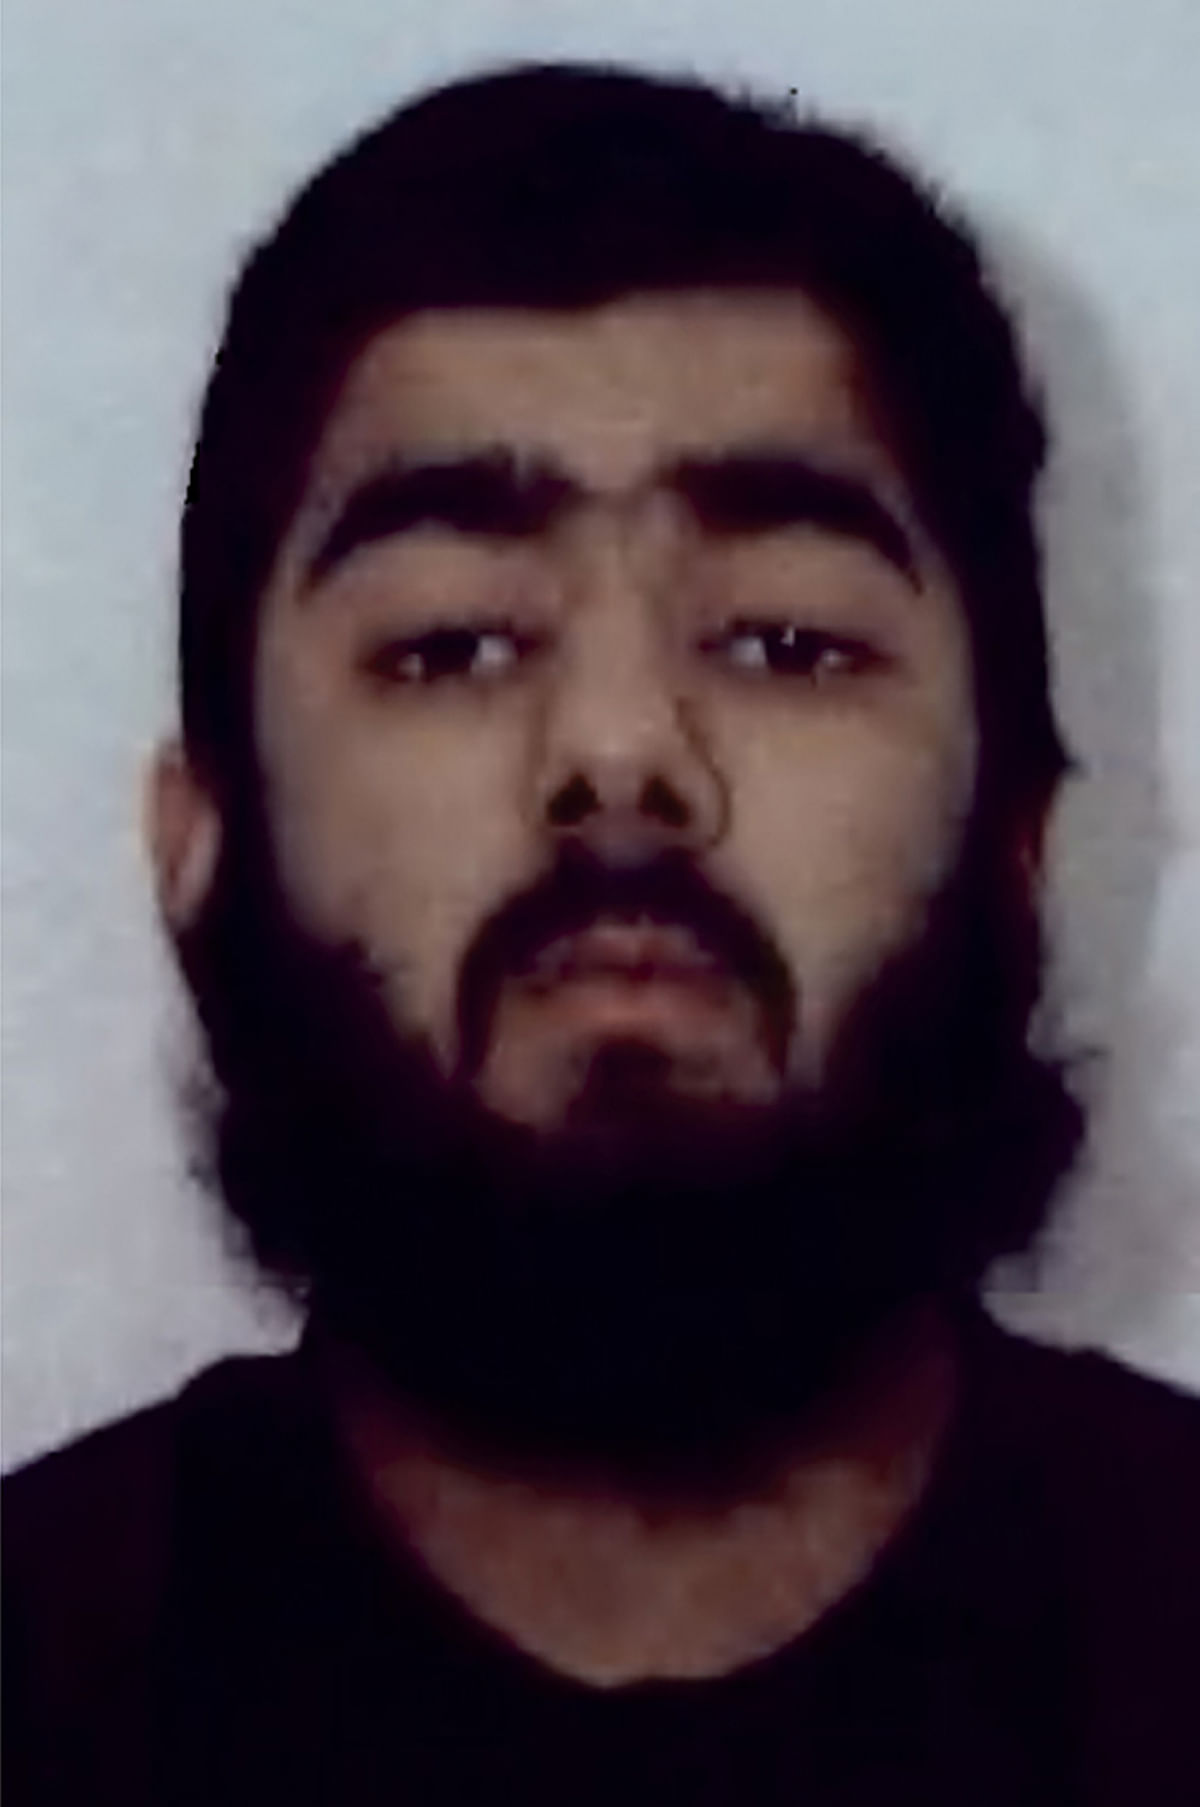 This undated file handout photo obtained from West Midlands Police on 1 February 2012 shows Islamist Usman Khan, then 20, who was jailed on 9 February 2012 with others after admitting to being involved with a group of fundamentalists who plotted a spate of mail bomb attacks during the run-up to Christmas in 2010. Photo: AFP